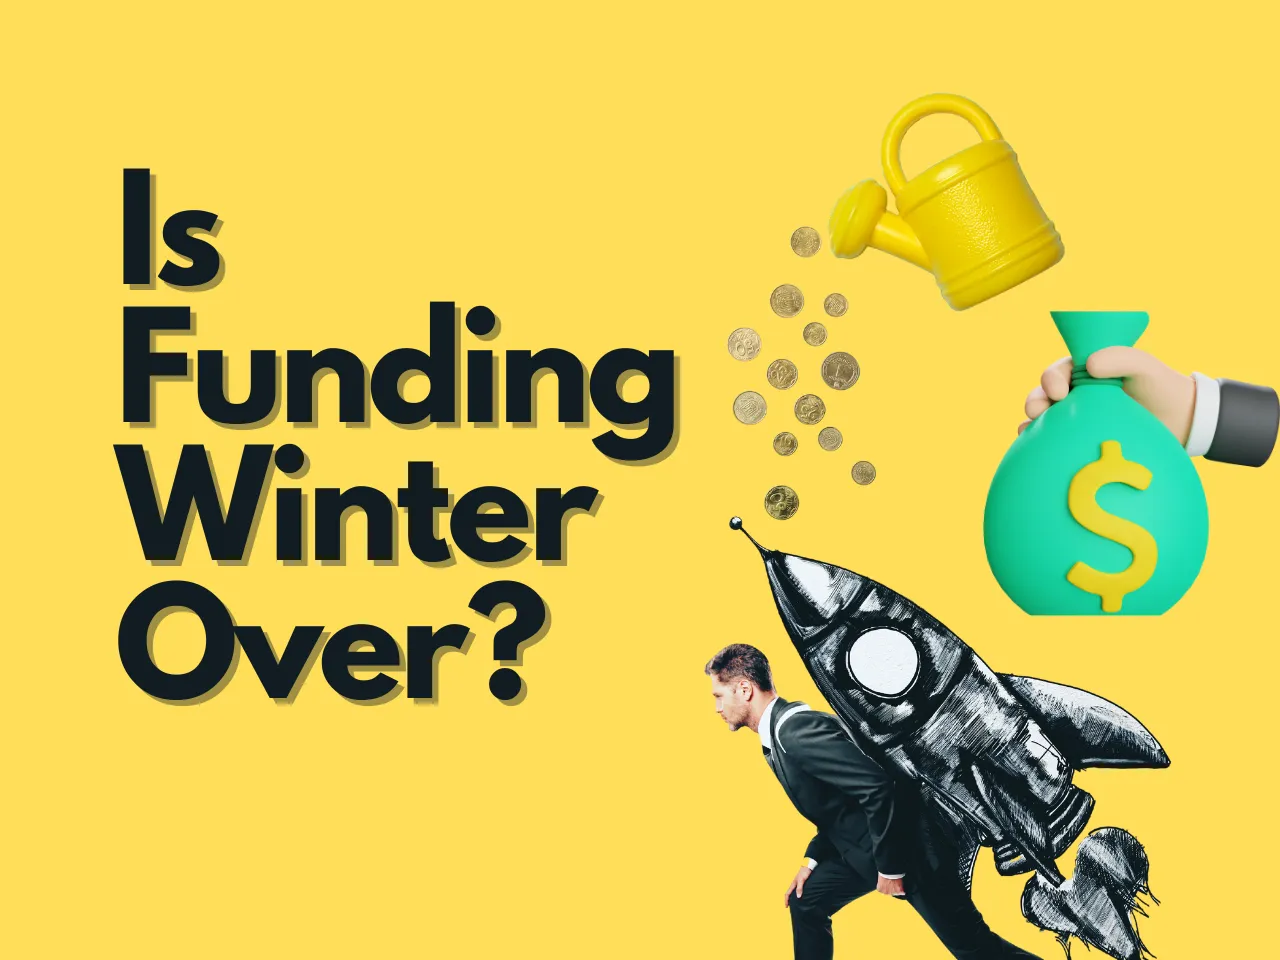 New Dawn Ahead: Can We Expect the Funding Winter to Pass Soon?